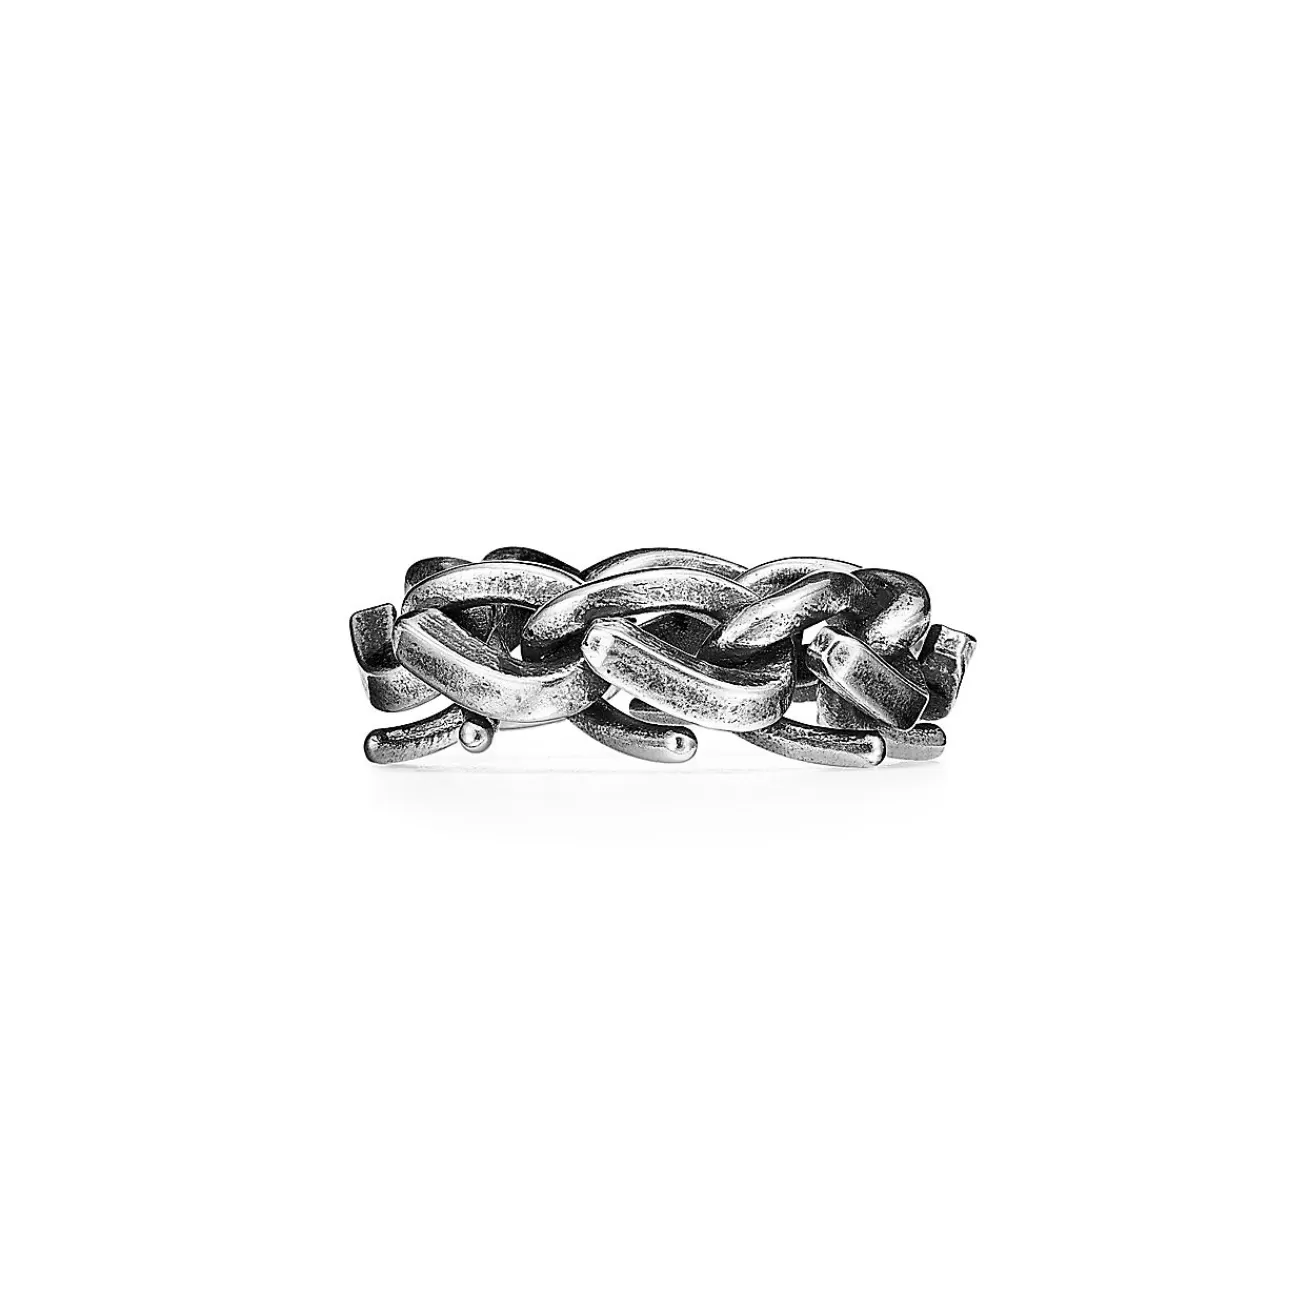 Tiffany & Co. Tiffany Forge Link Ring in Blackened Sterling Silver | ^ Rings | Men's Jewelry